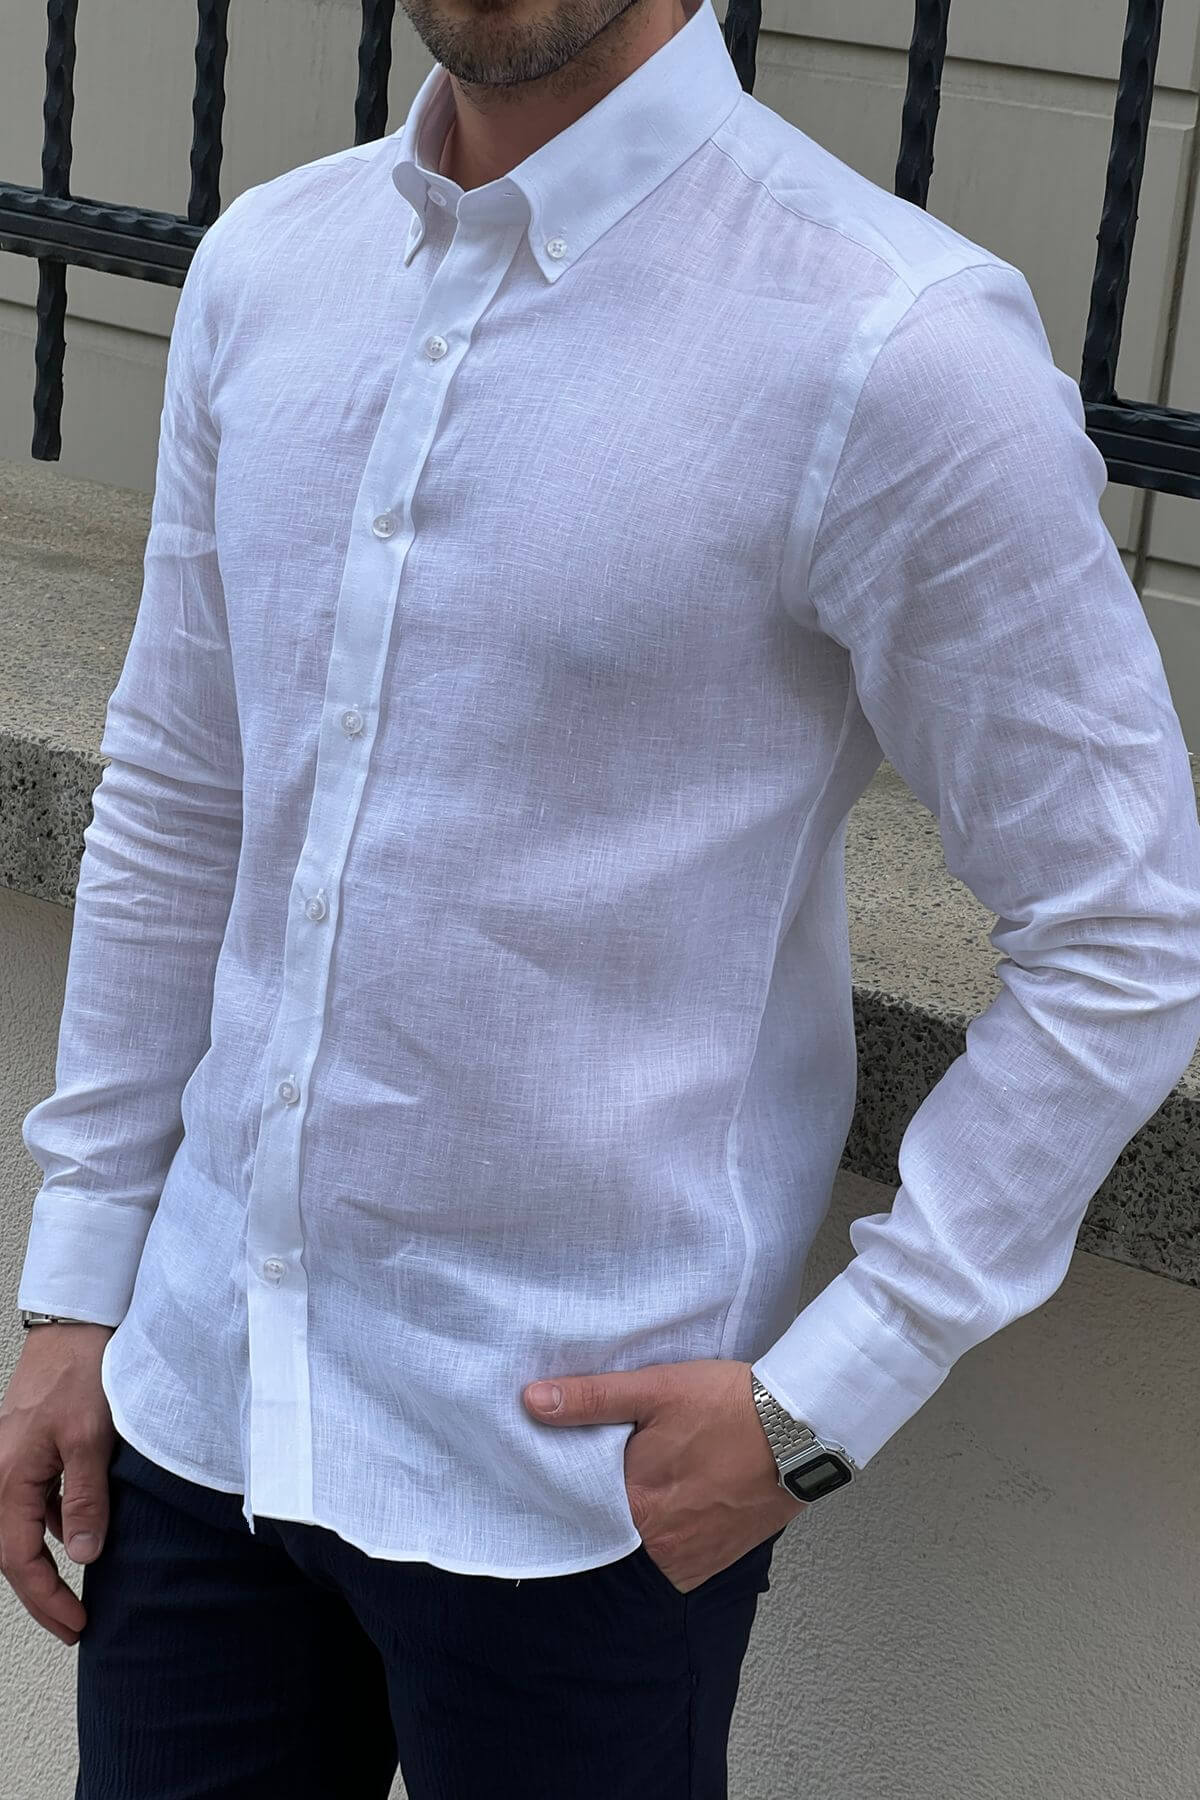 A White Linen Shirt on display